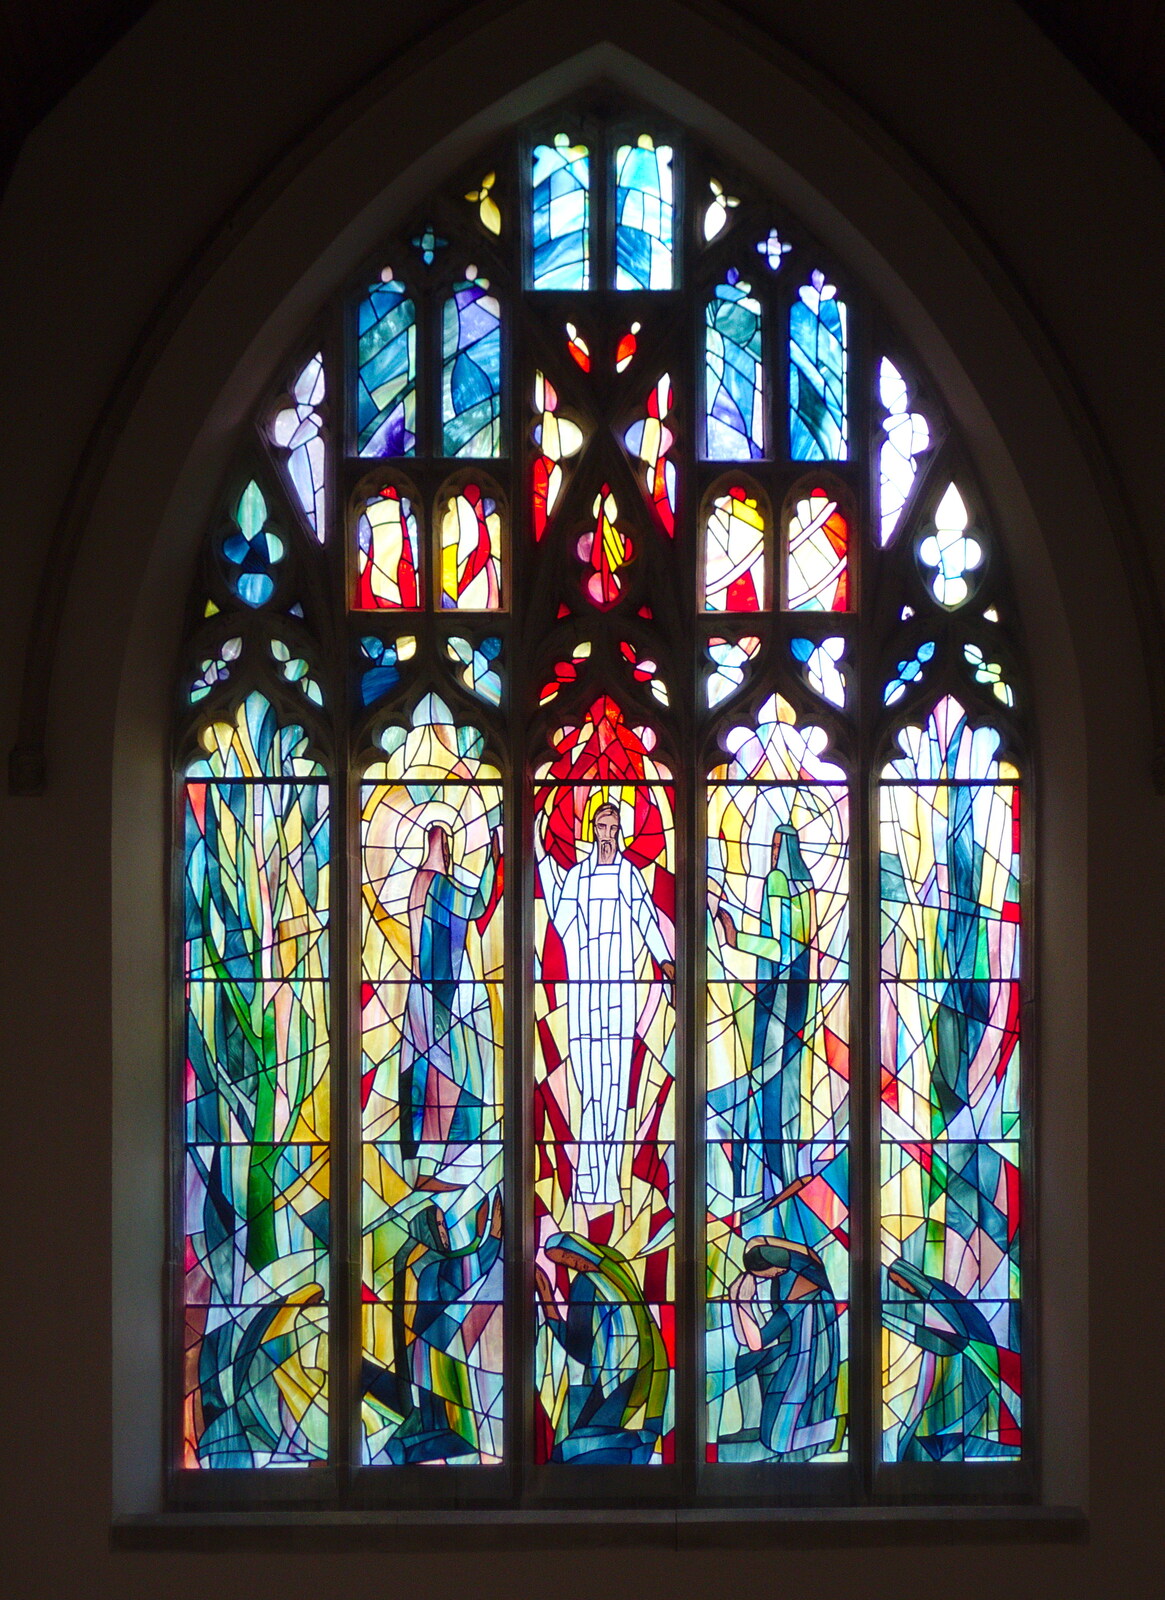 A rather nice modern stained glass window from A Postcard from Boxford and BSCC at Pulham, Suffolk and Norfolk - 13th July 2019